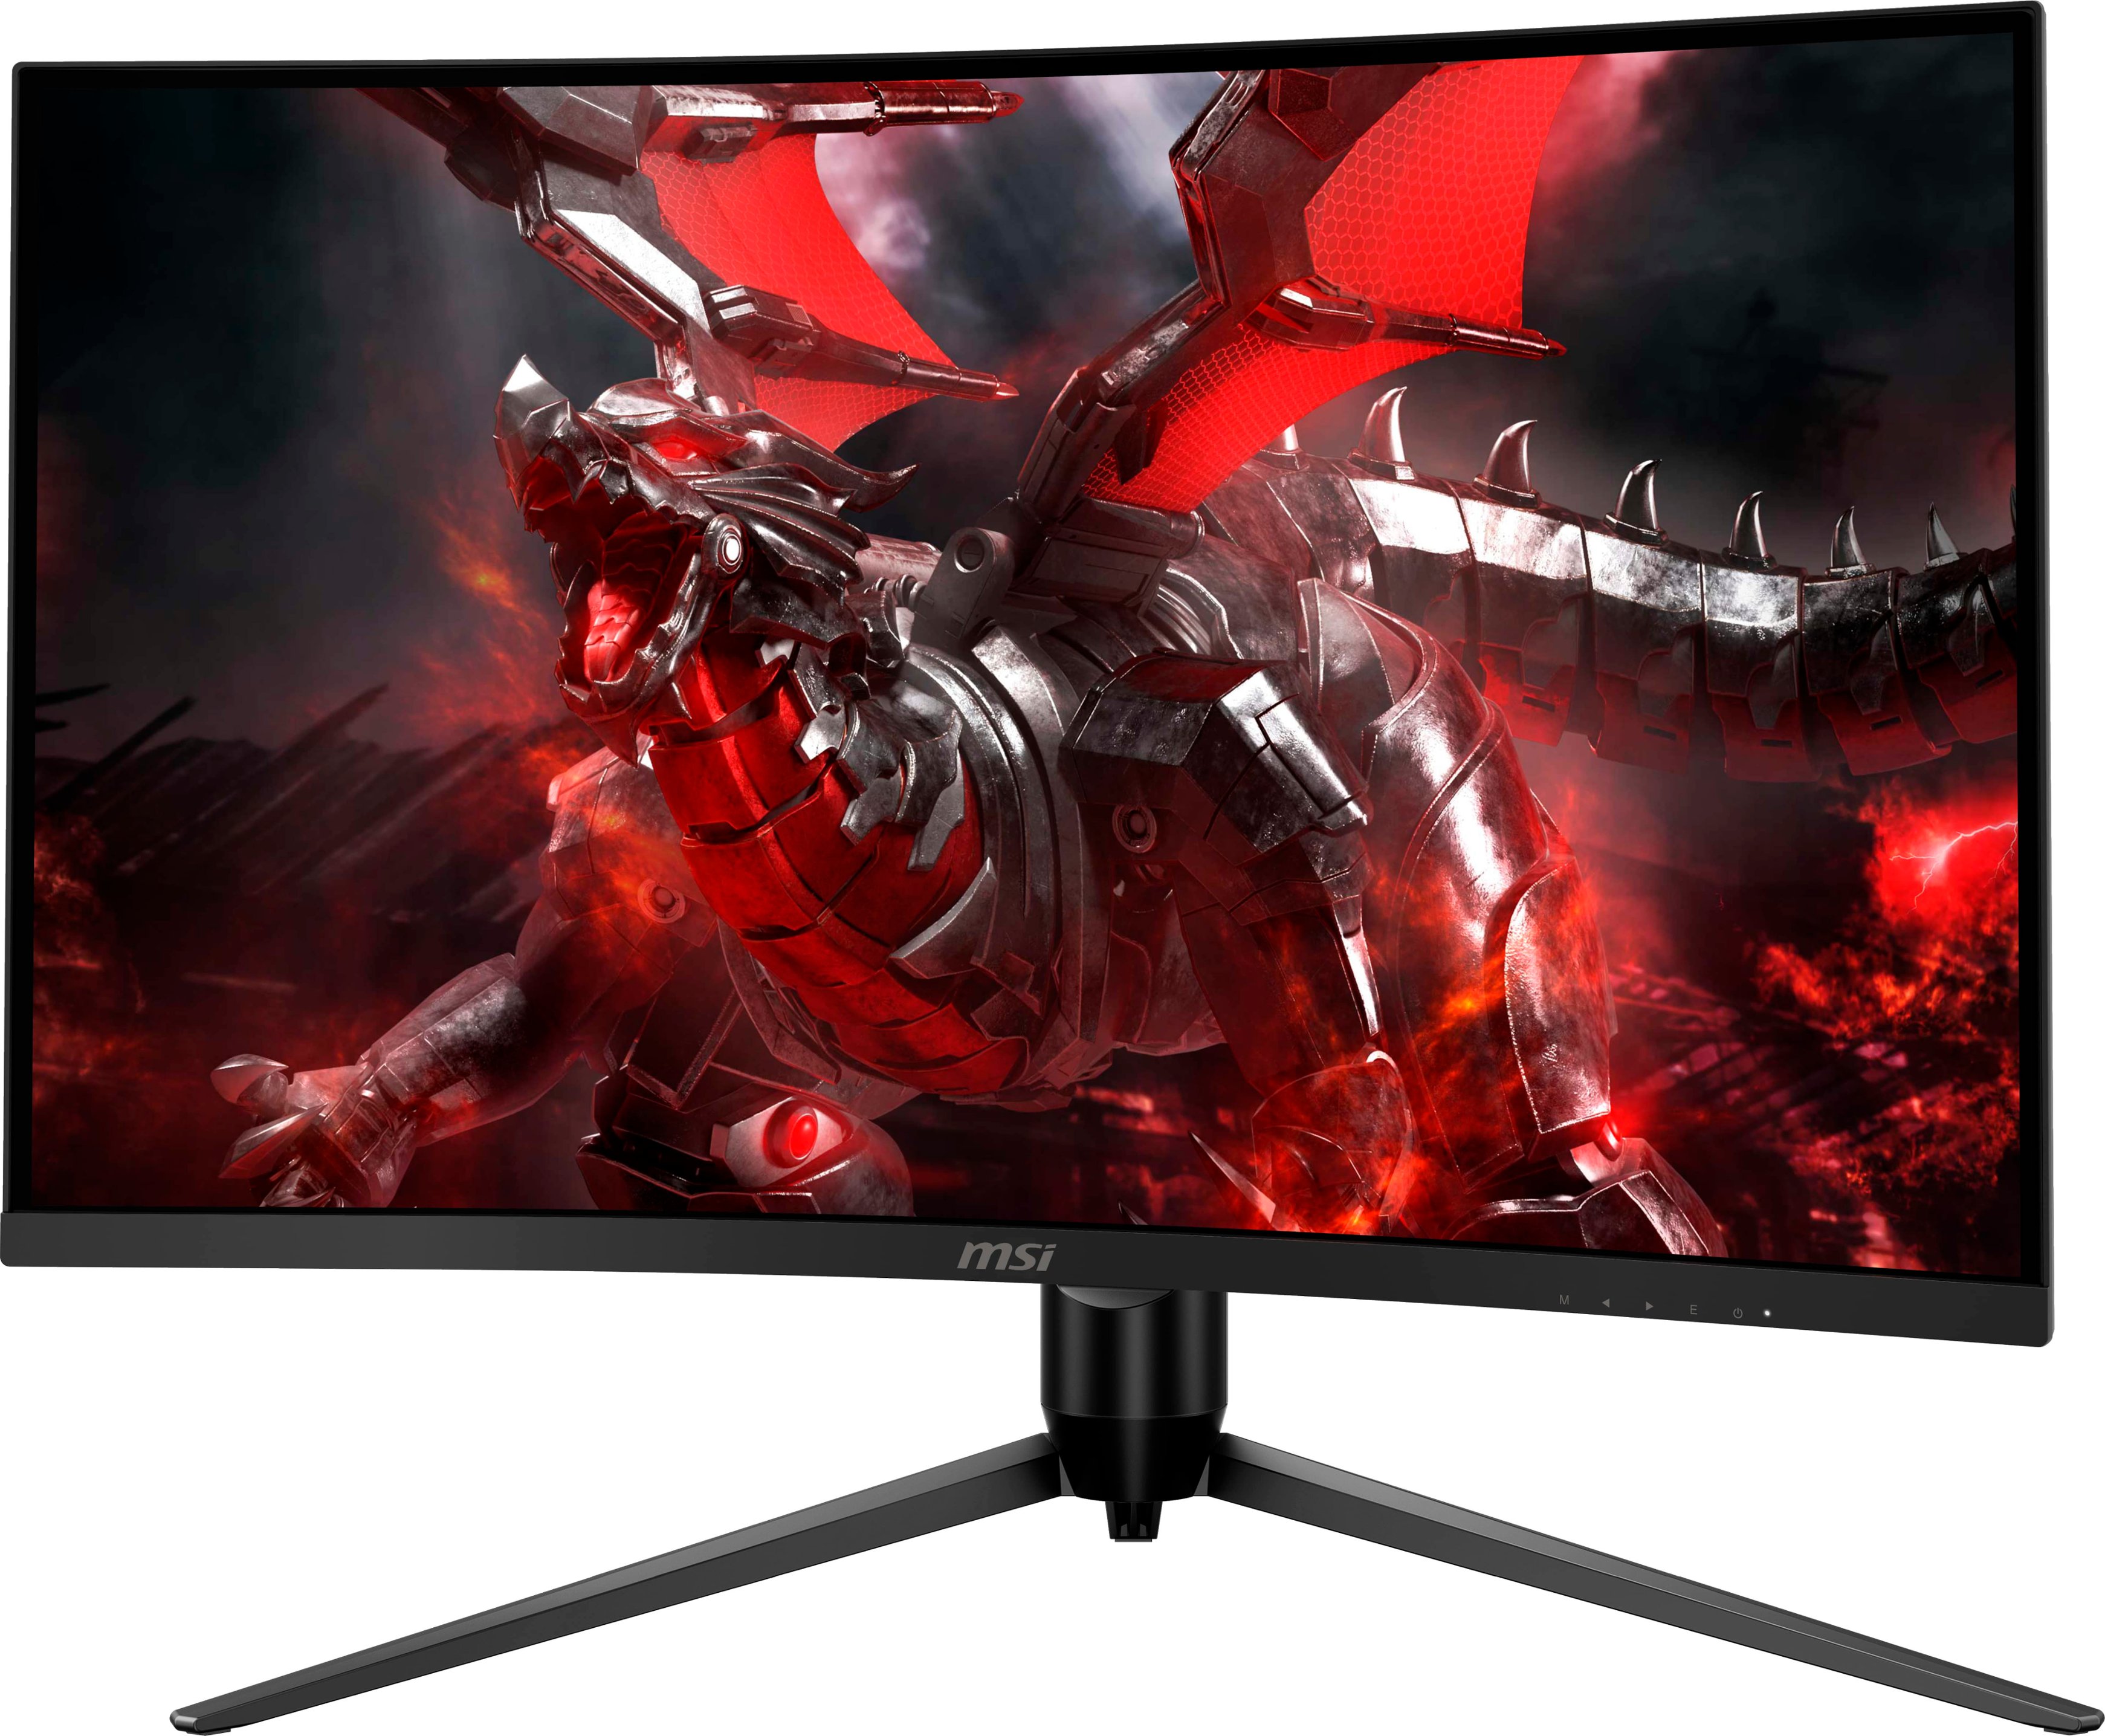 Zoom in on Left Zoom. MSI - Optix 27" LED Curved FHD FreeSync Monitor with Height, Tilt, Swivel (DisplayPort, HDMI) - Black.